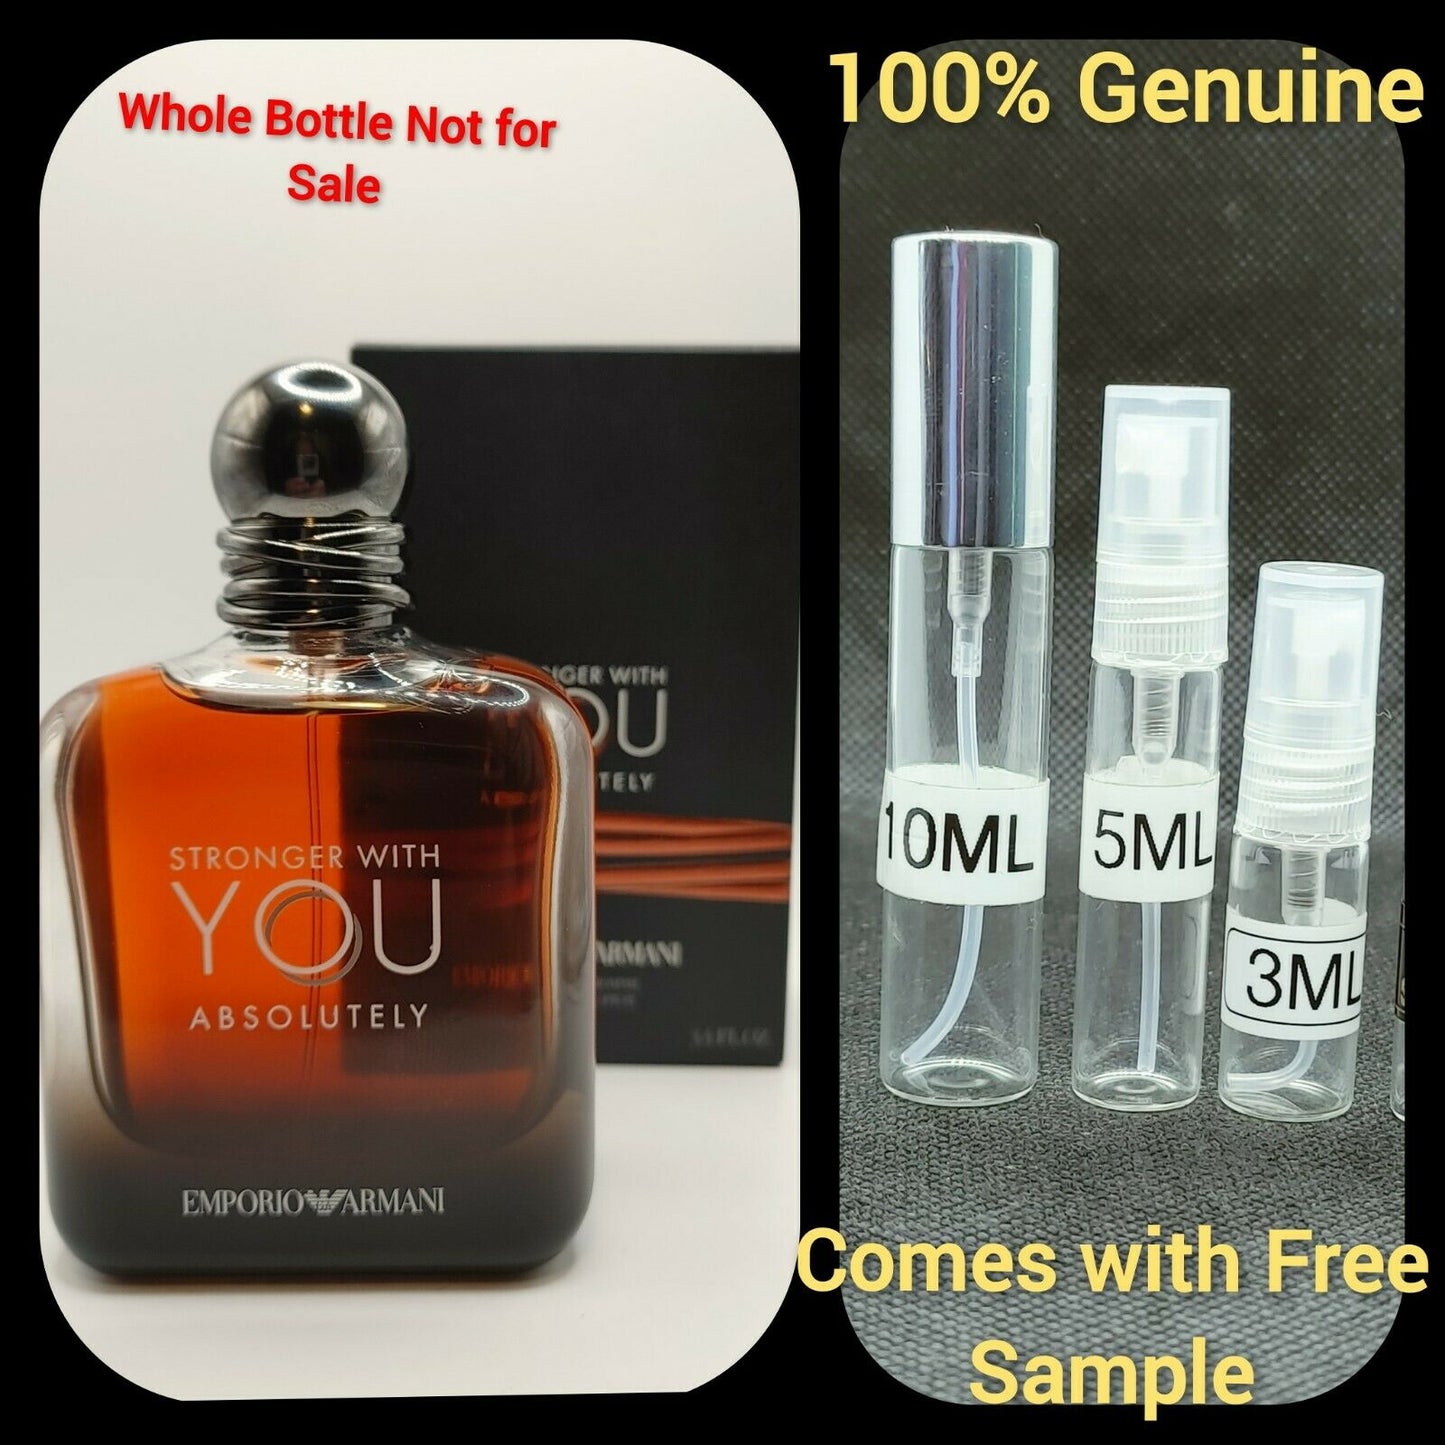 Giorgio Armani Stronger With You Absolutely Samples Plus Free Sample+bag